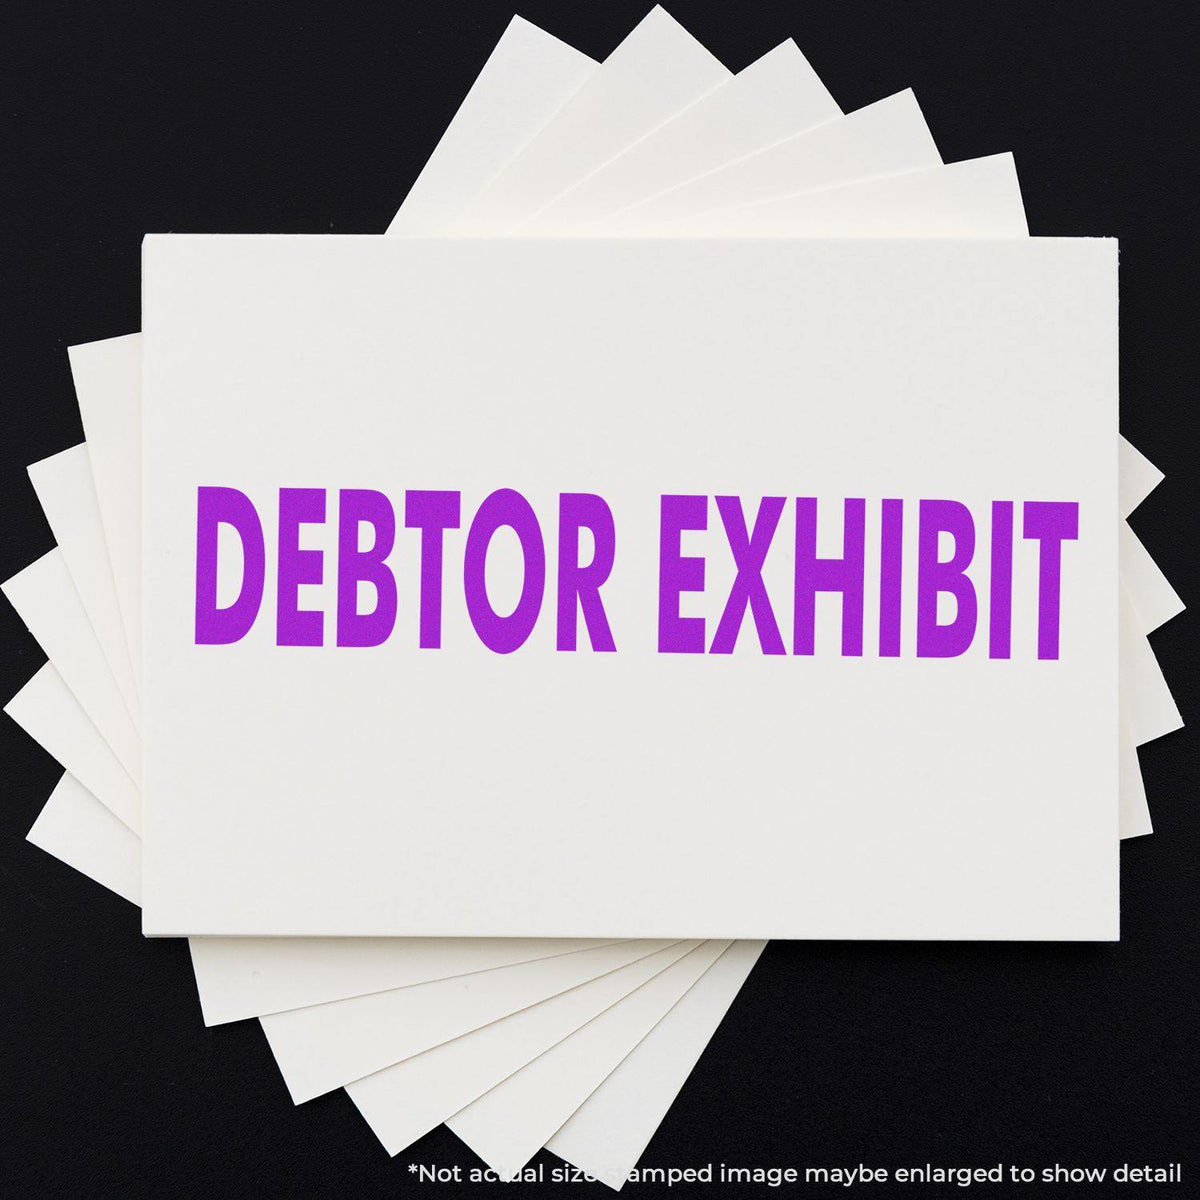 Large Debtor Exhibit Rubber Stamp In Use Photo